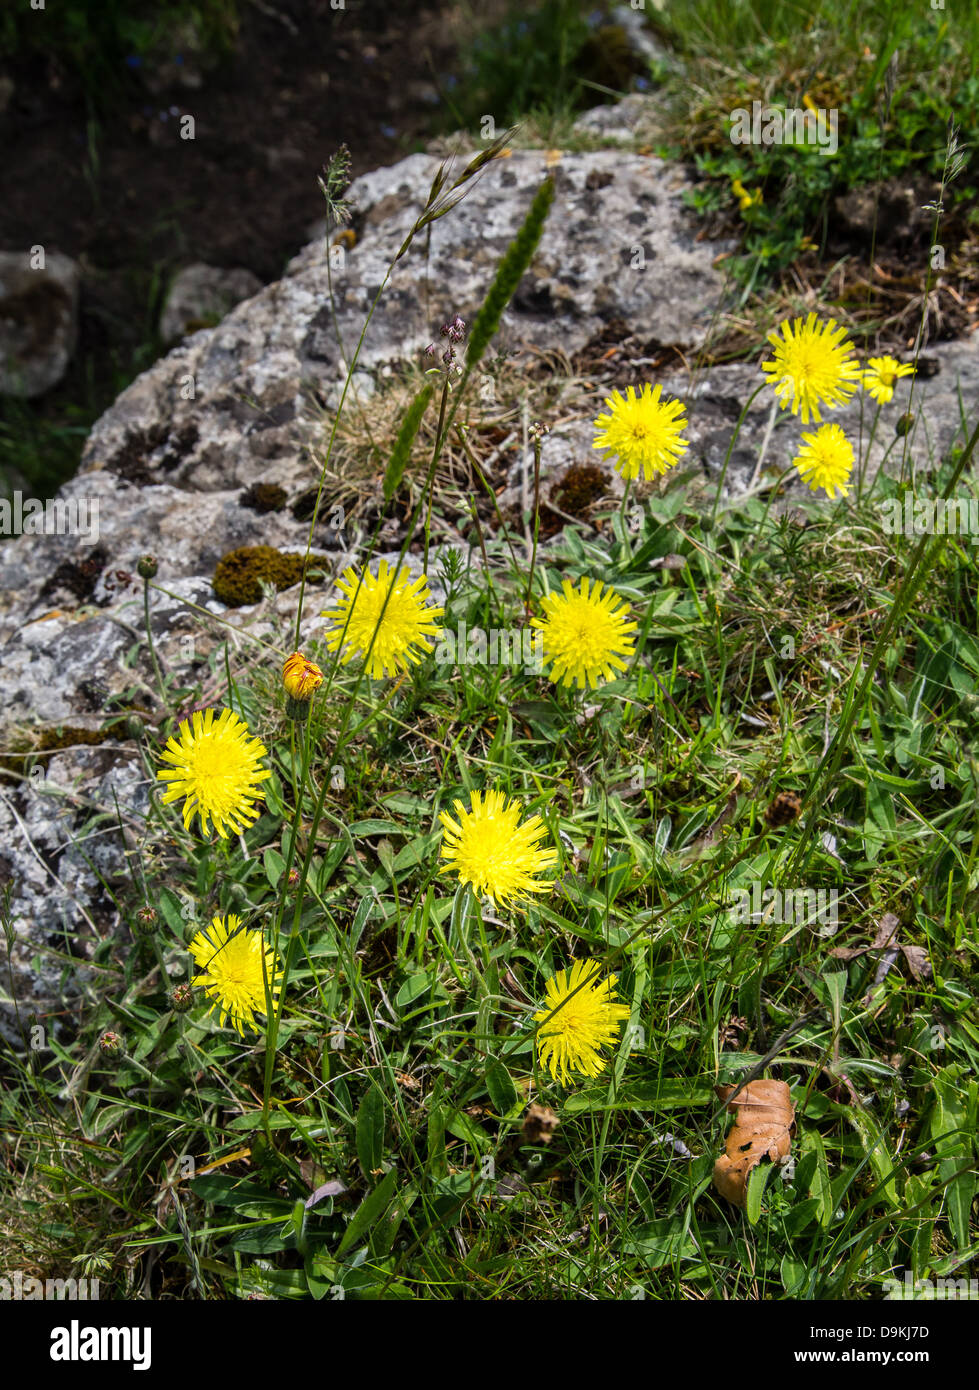 Mouse Ear Hawkweed Pilosella or Hieracum officinarum is a pale yellow flower commonly found on limestone soils in europe Stock Photo